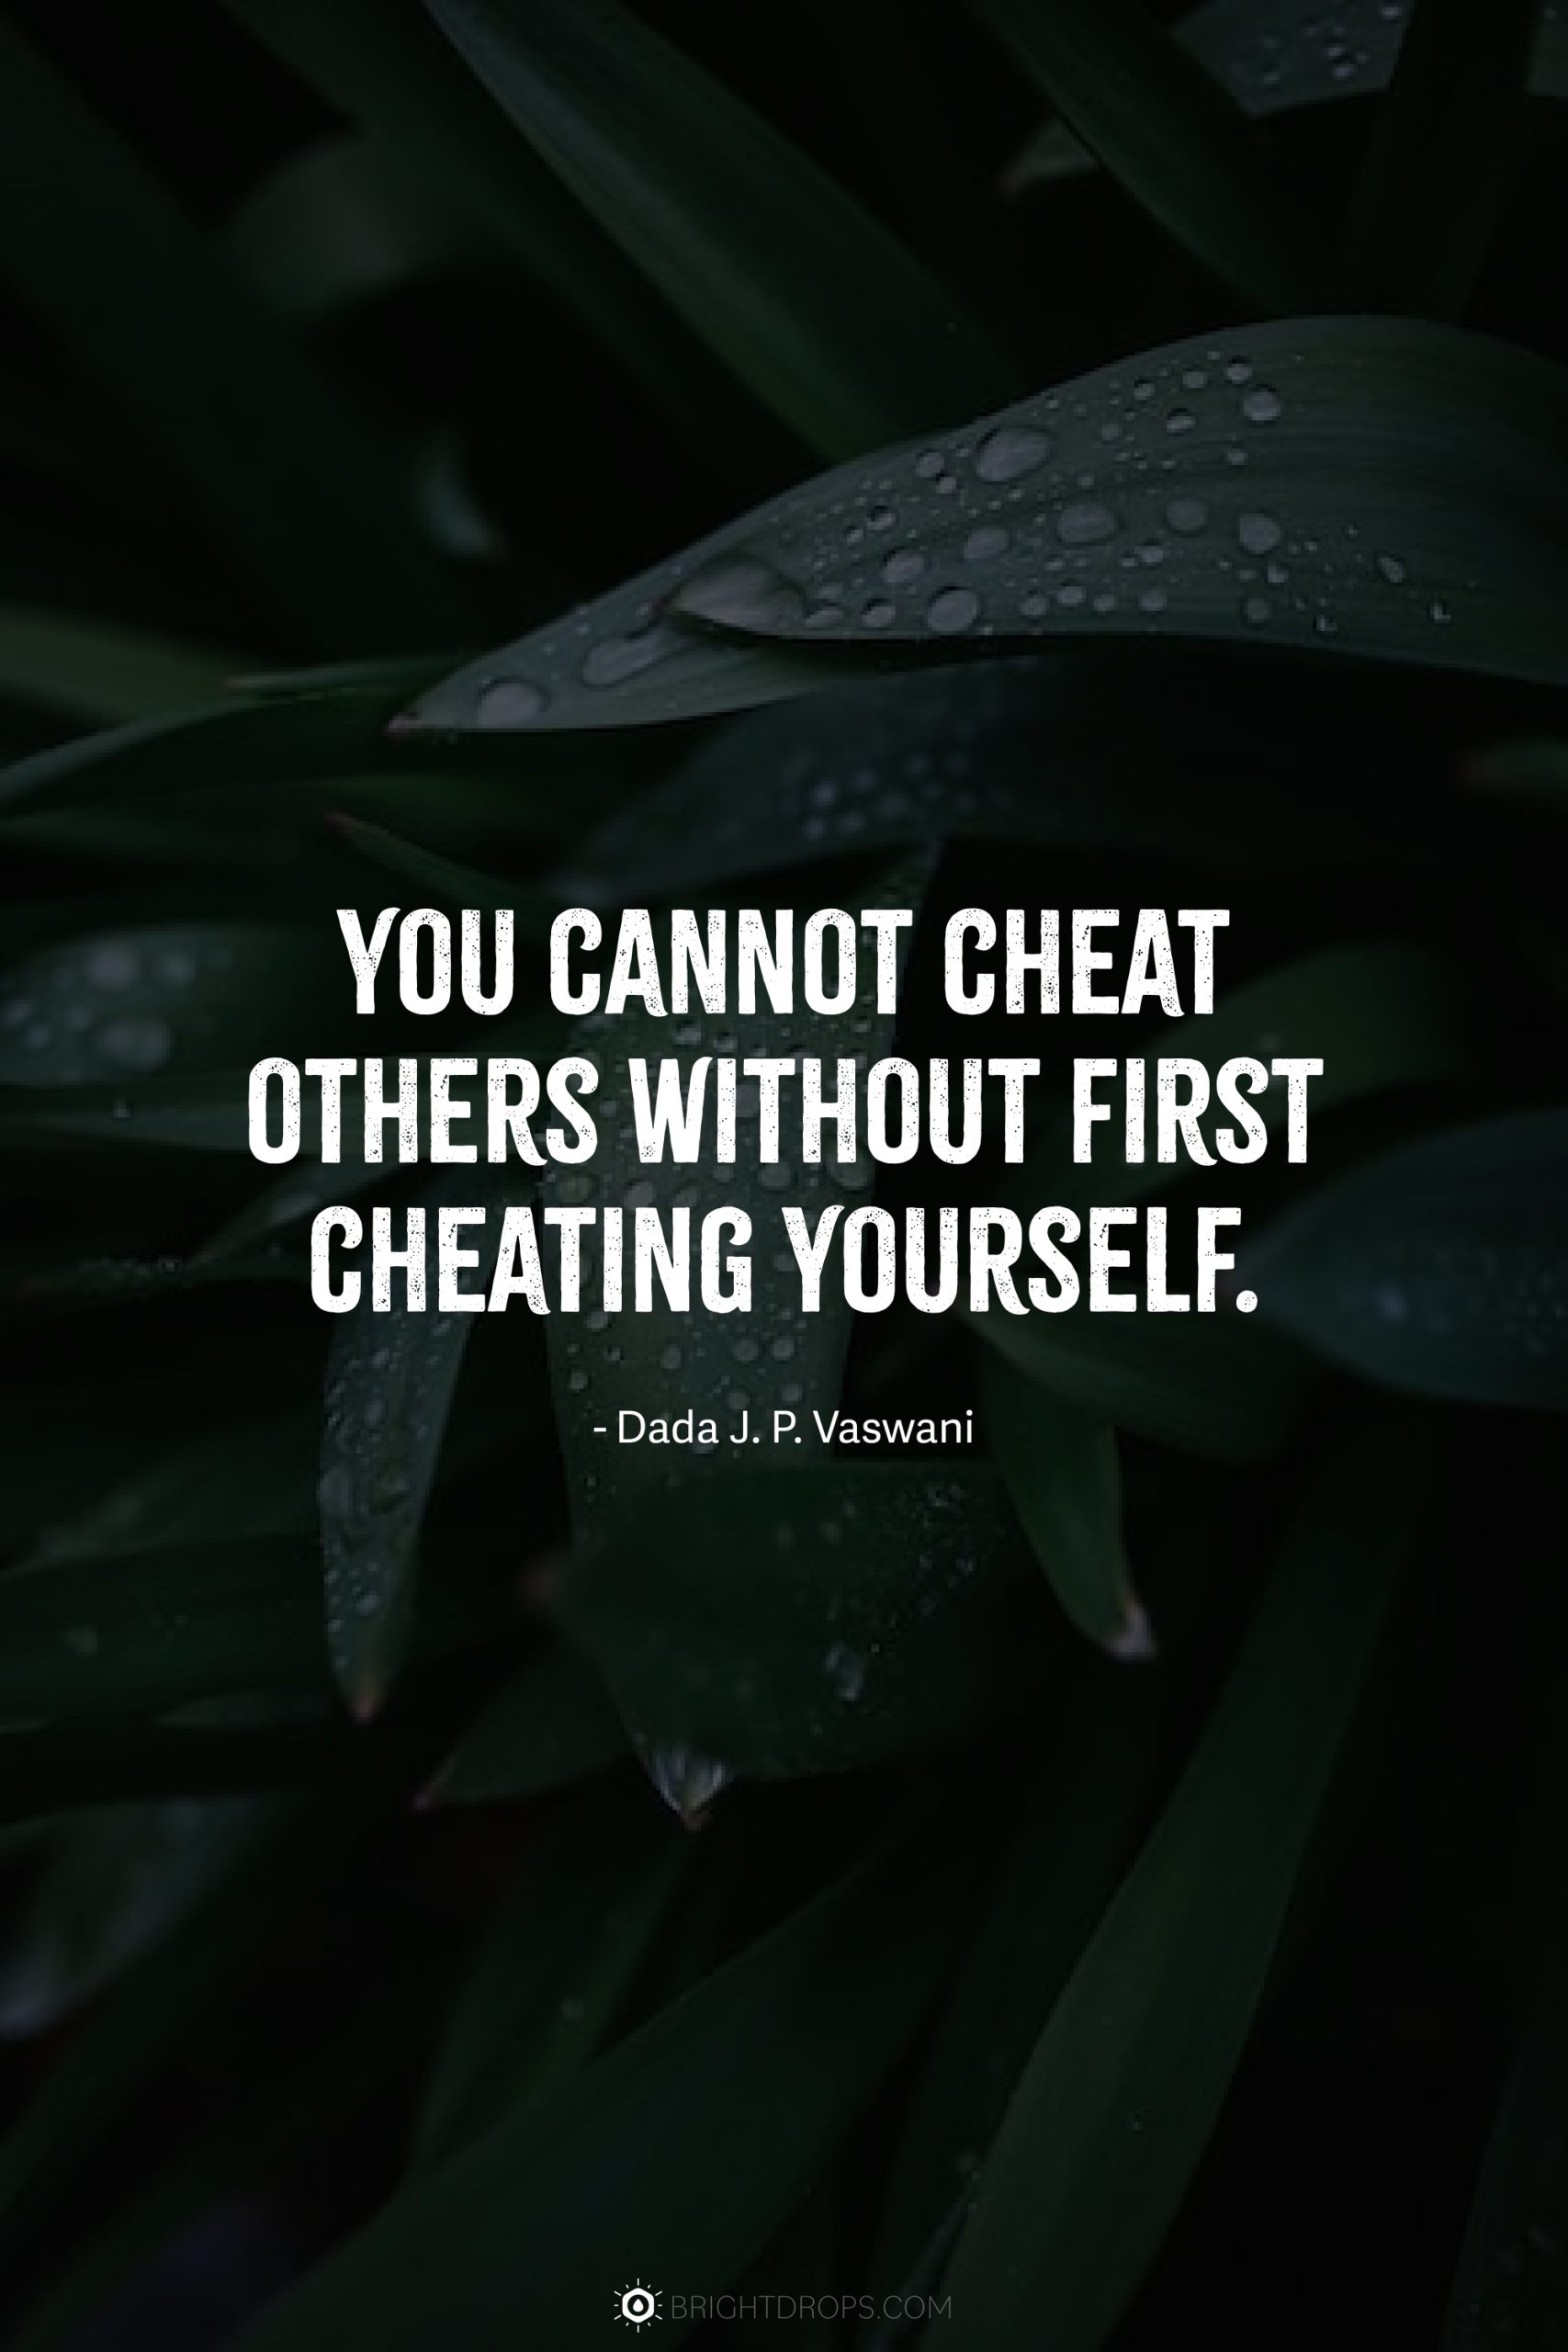 You cannot cheat others without first cheating yourself.